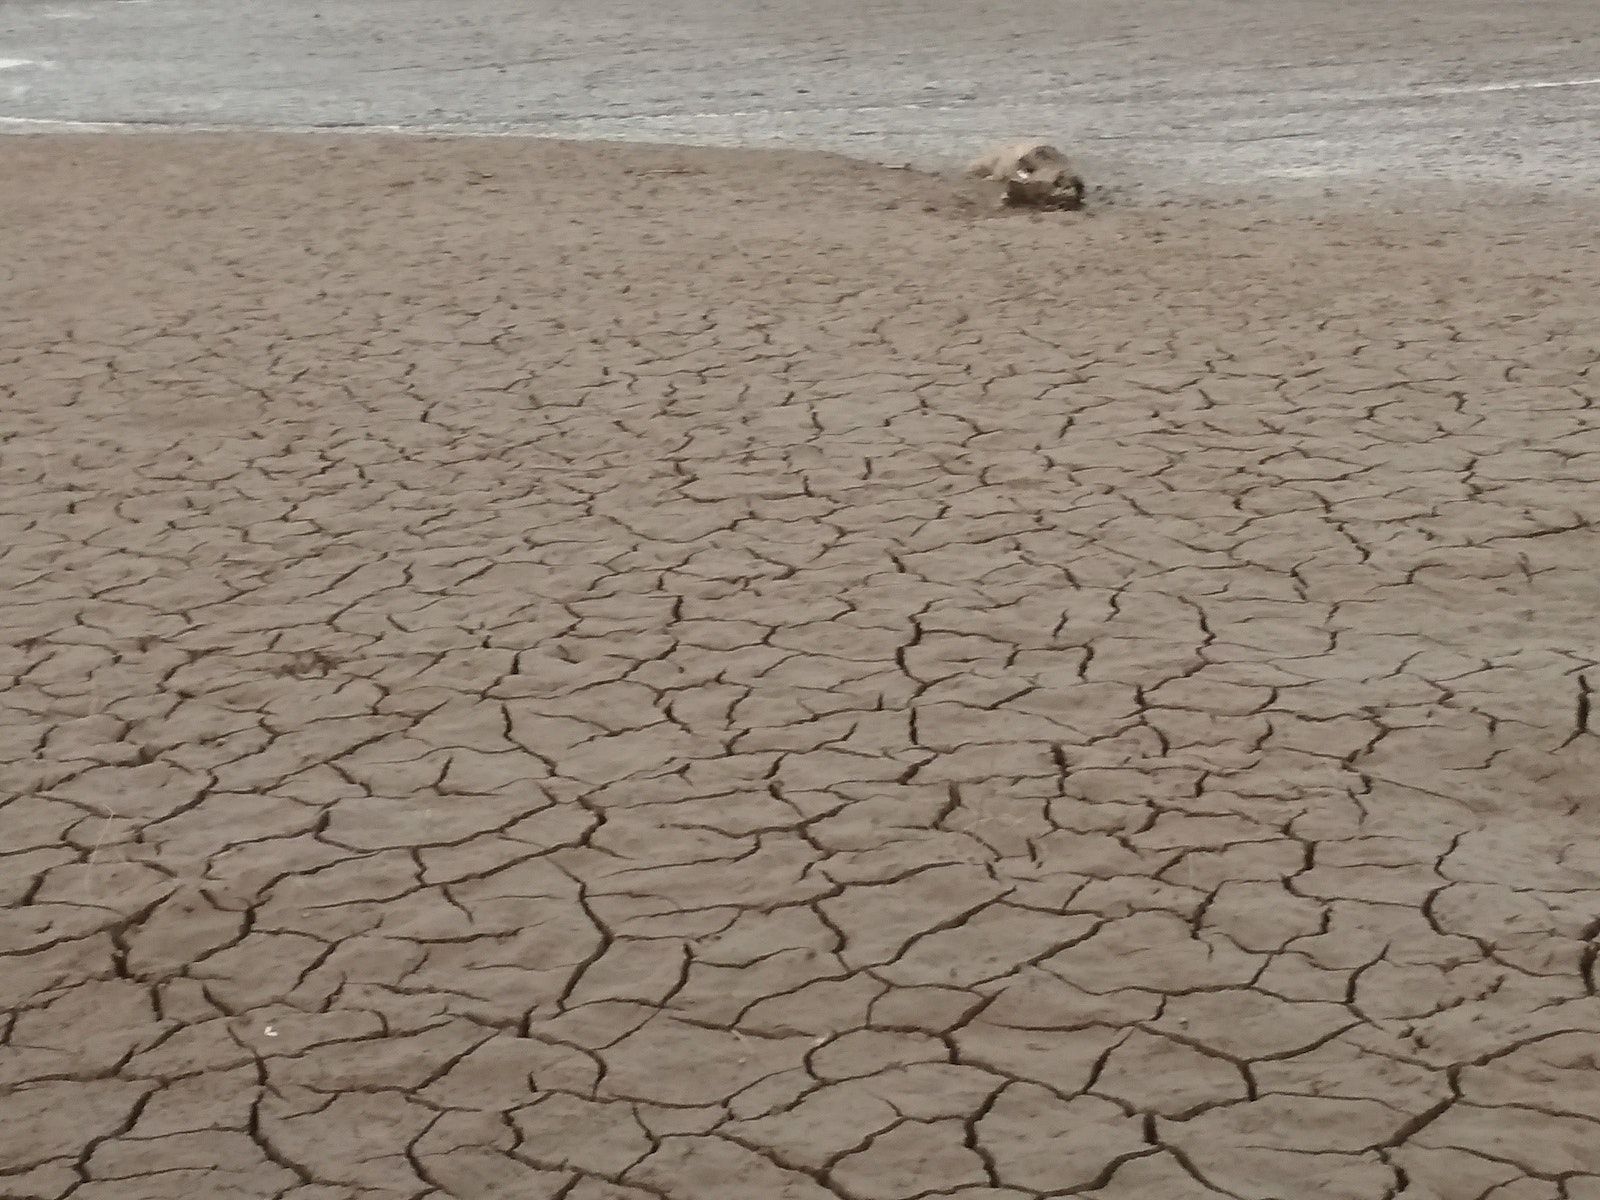 A lake in drought